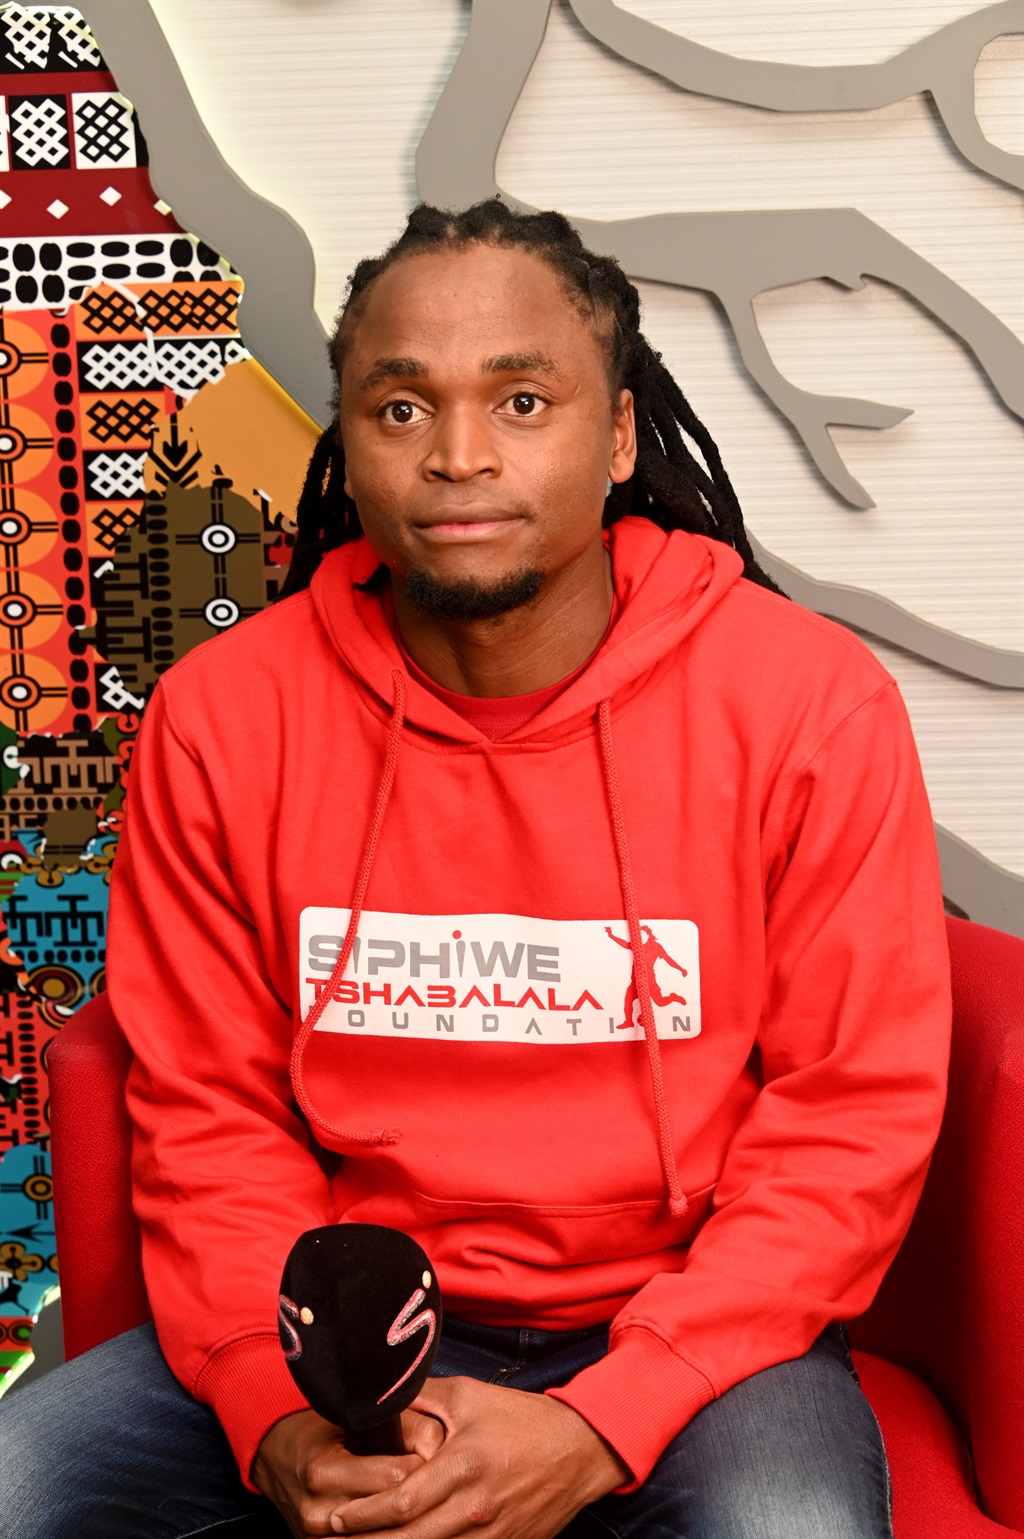 JOHANNESBURG, SOUTH AFRICA - MAY 30: Siphiwe Tshabalala at Kaya FM Studios on May 30, 2022 in Johannesburg, South Africa.  The tour sees the trophy travel around the world and offers fans the opportunity to see the trophy ahead of the tournament later this year in Qatar. (Photo by Gallo Images/Oupa Bopape)